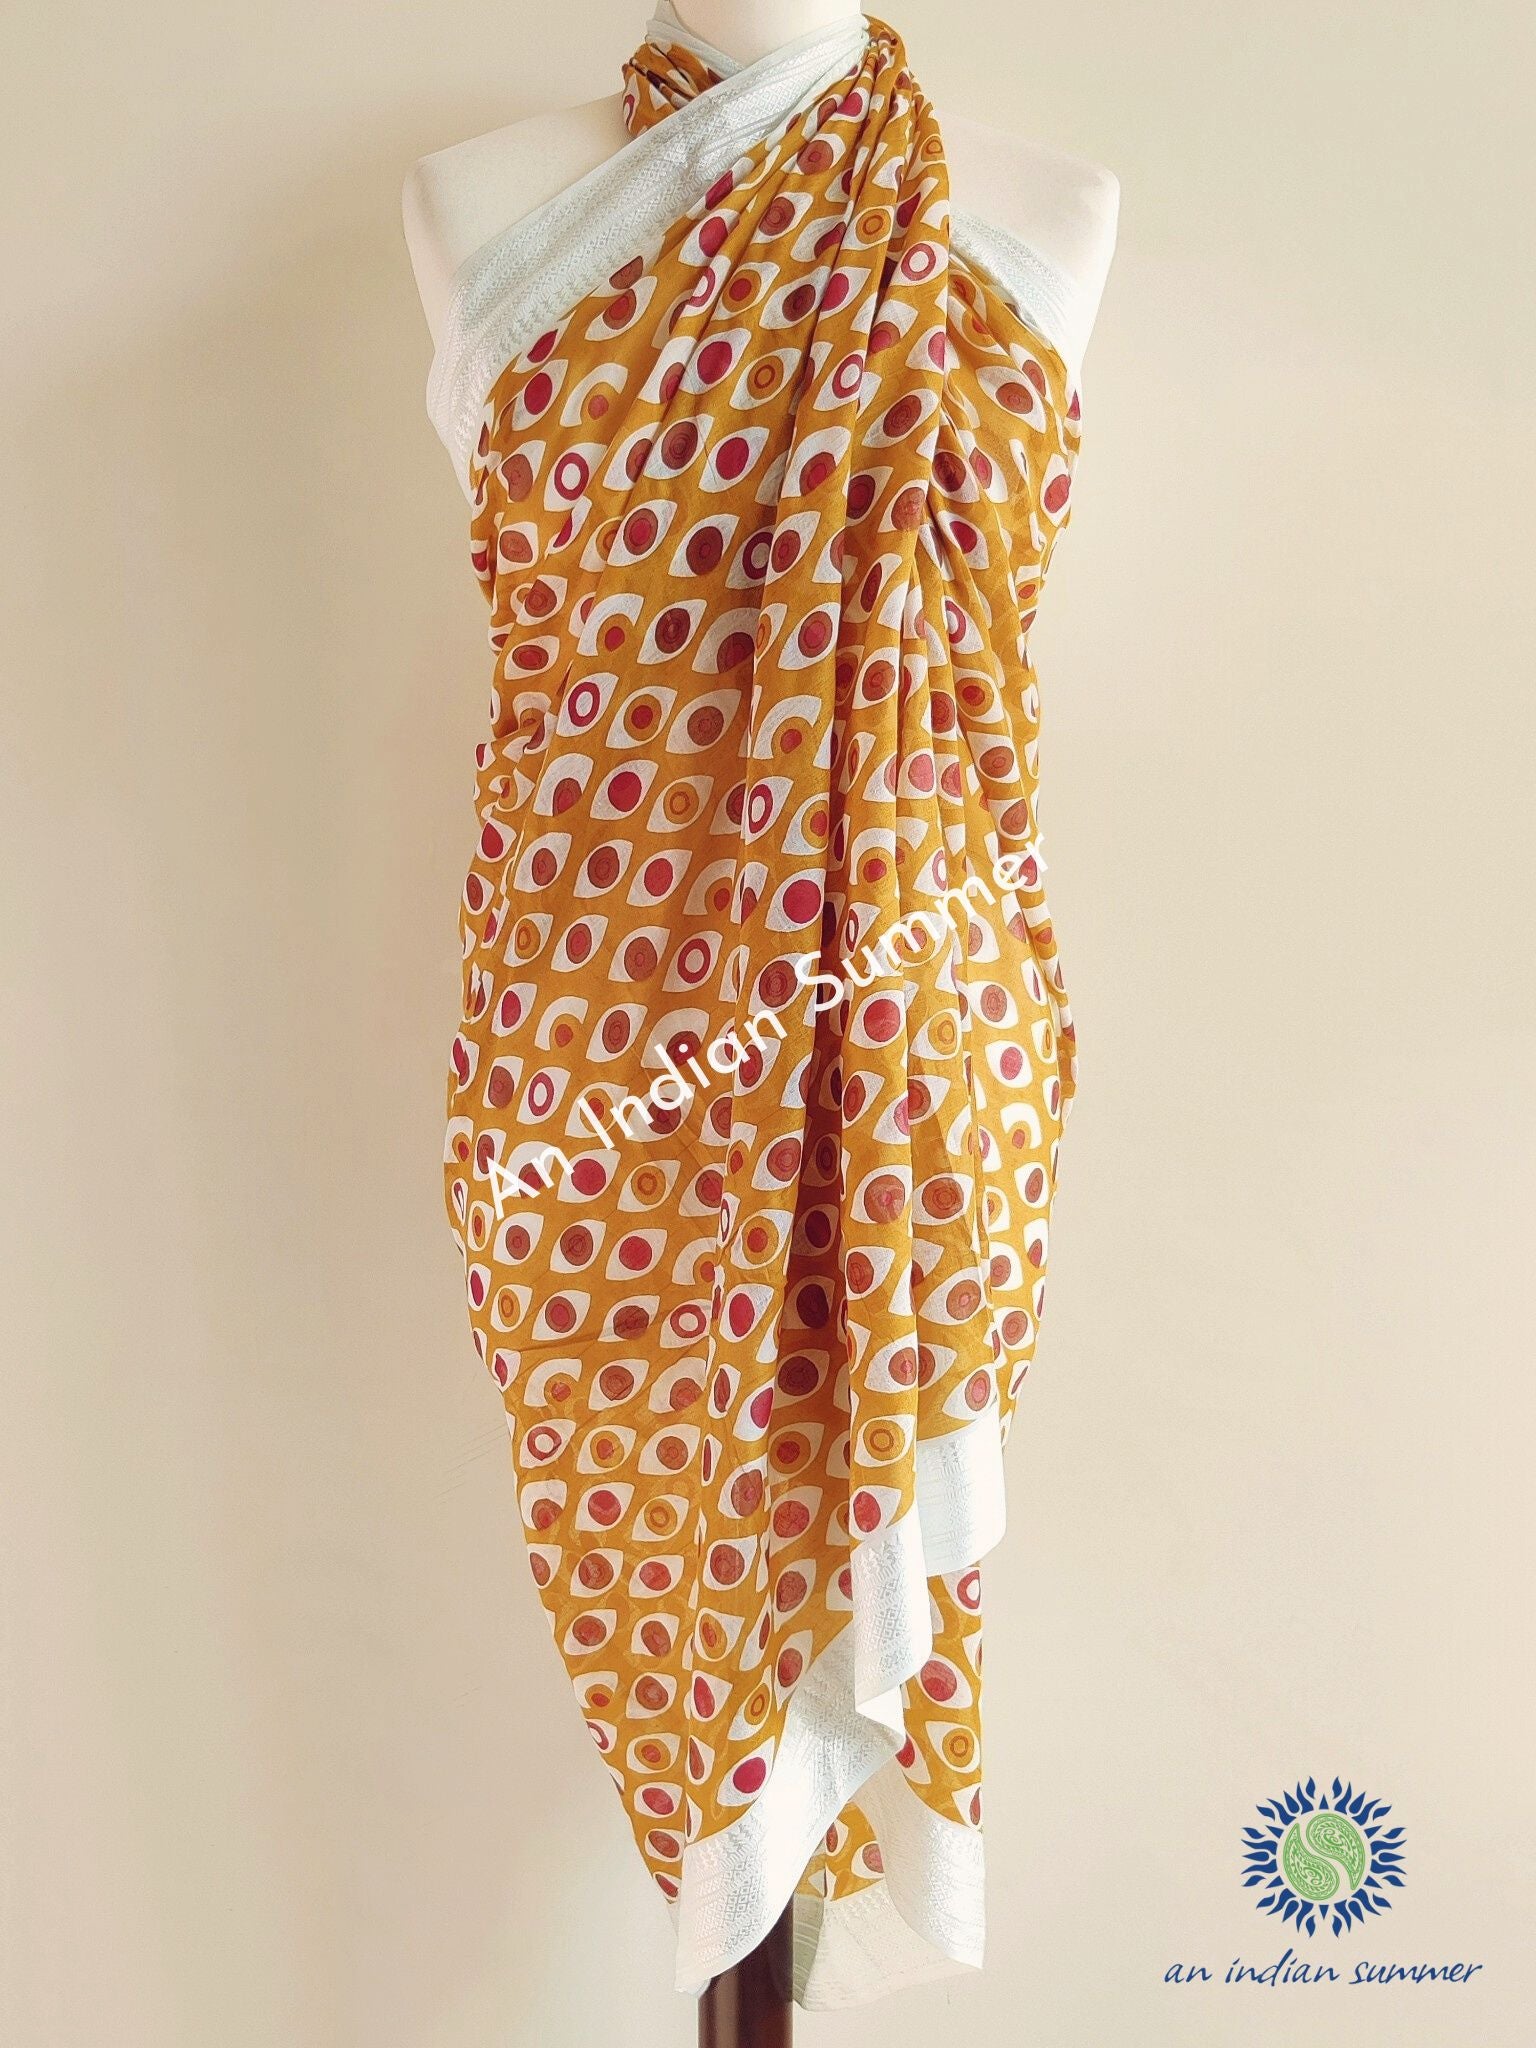 Evil Eye Woven Border Sarong Pareo | Mustard Yellow | Hand Block Printed | Soft Cotton Voile | An Indian Summer | Seasonless Timeless Sustainable Ethical Authentic Artisan Conscious Clothing Lifestyle Brand